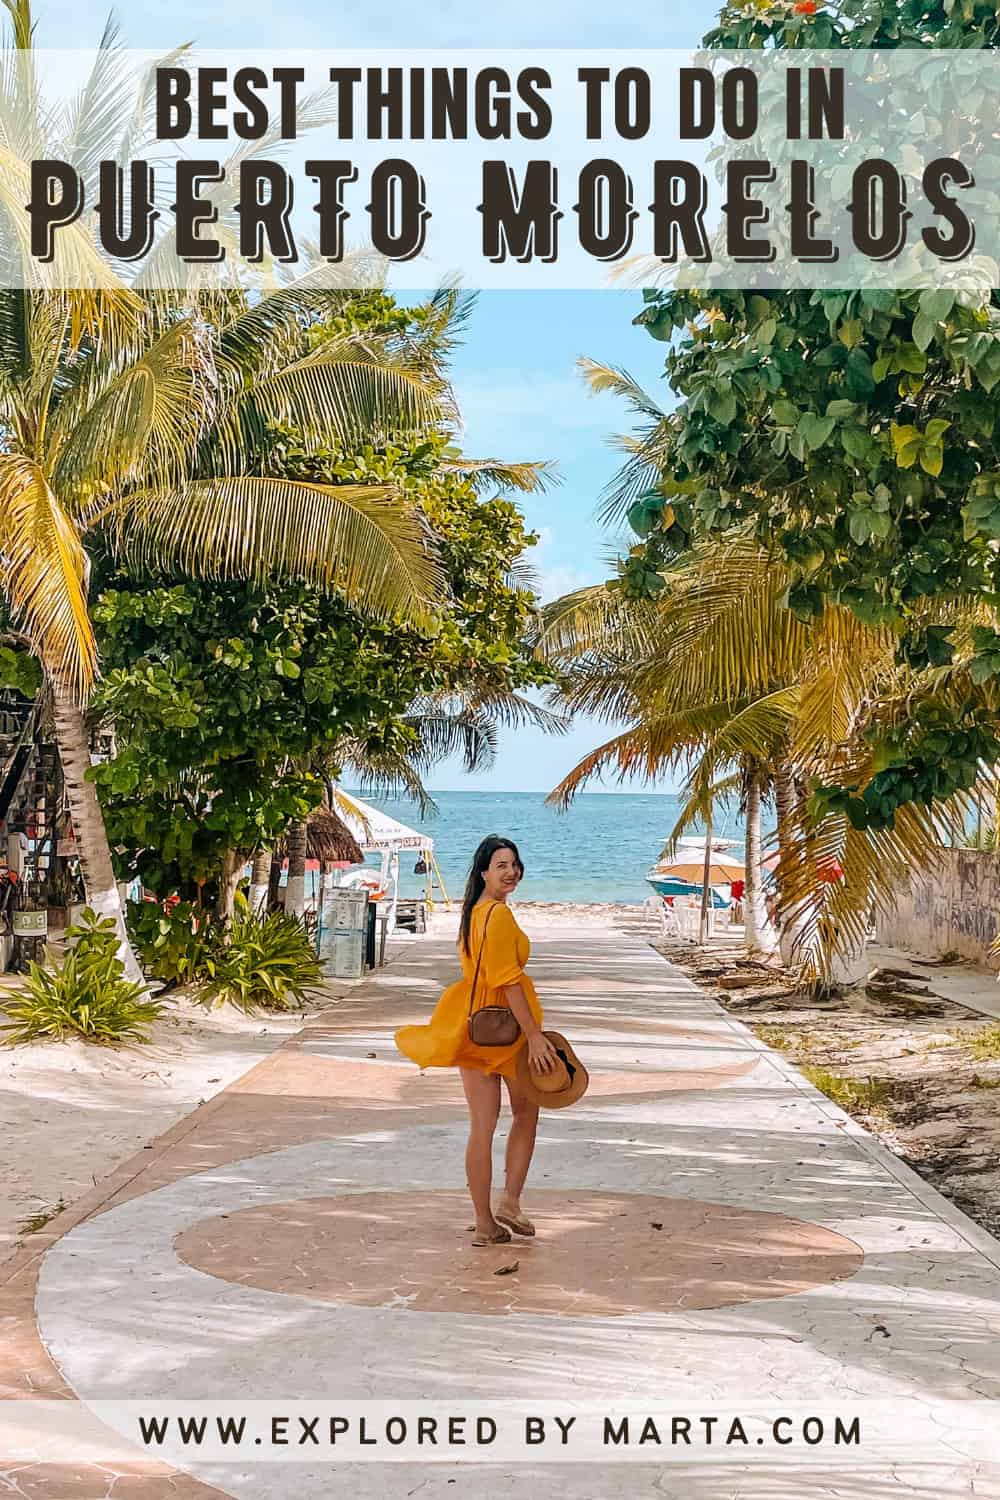 Best things to do in Puerto Morelos in Mexico